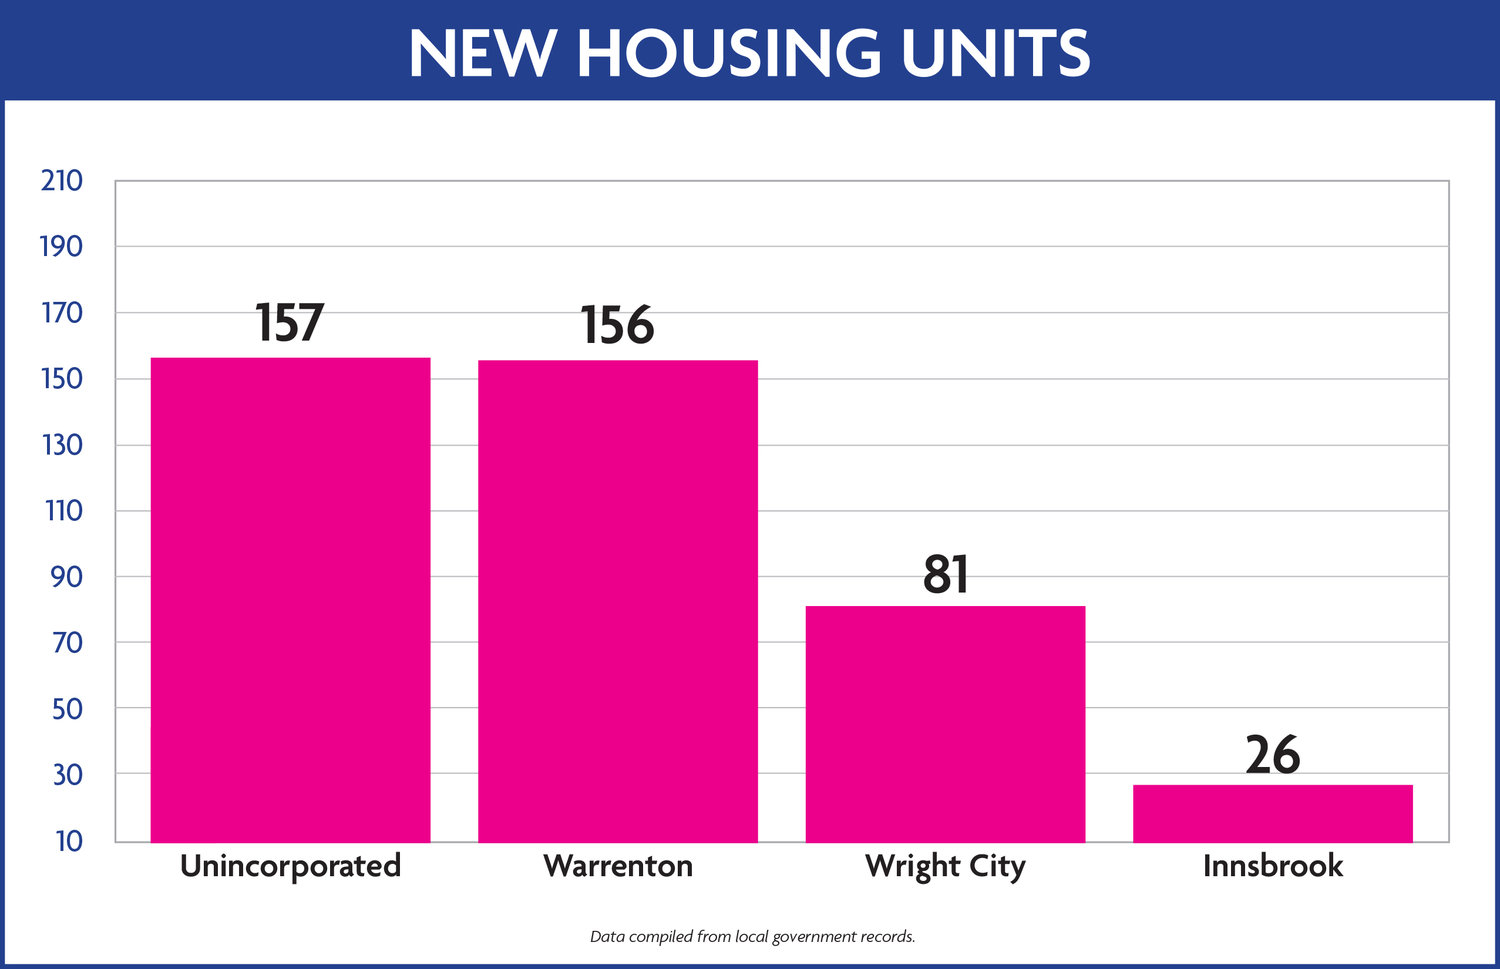 New housing development in Warren County in 2021 primarily took place in three municipalities, along with unincorporated areas.